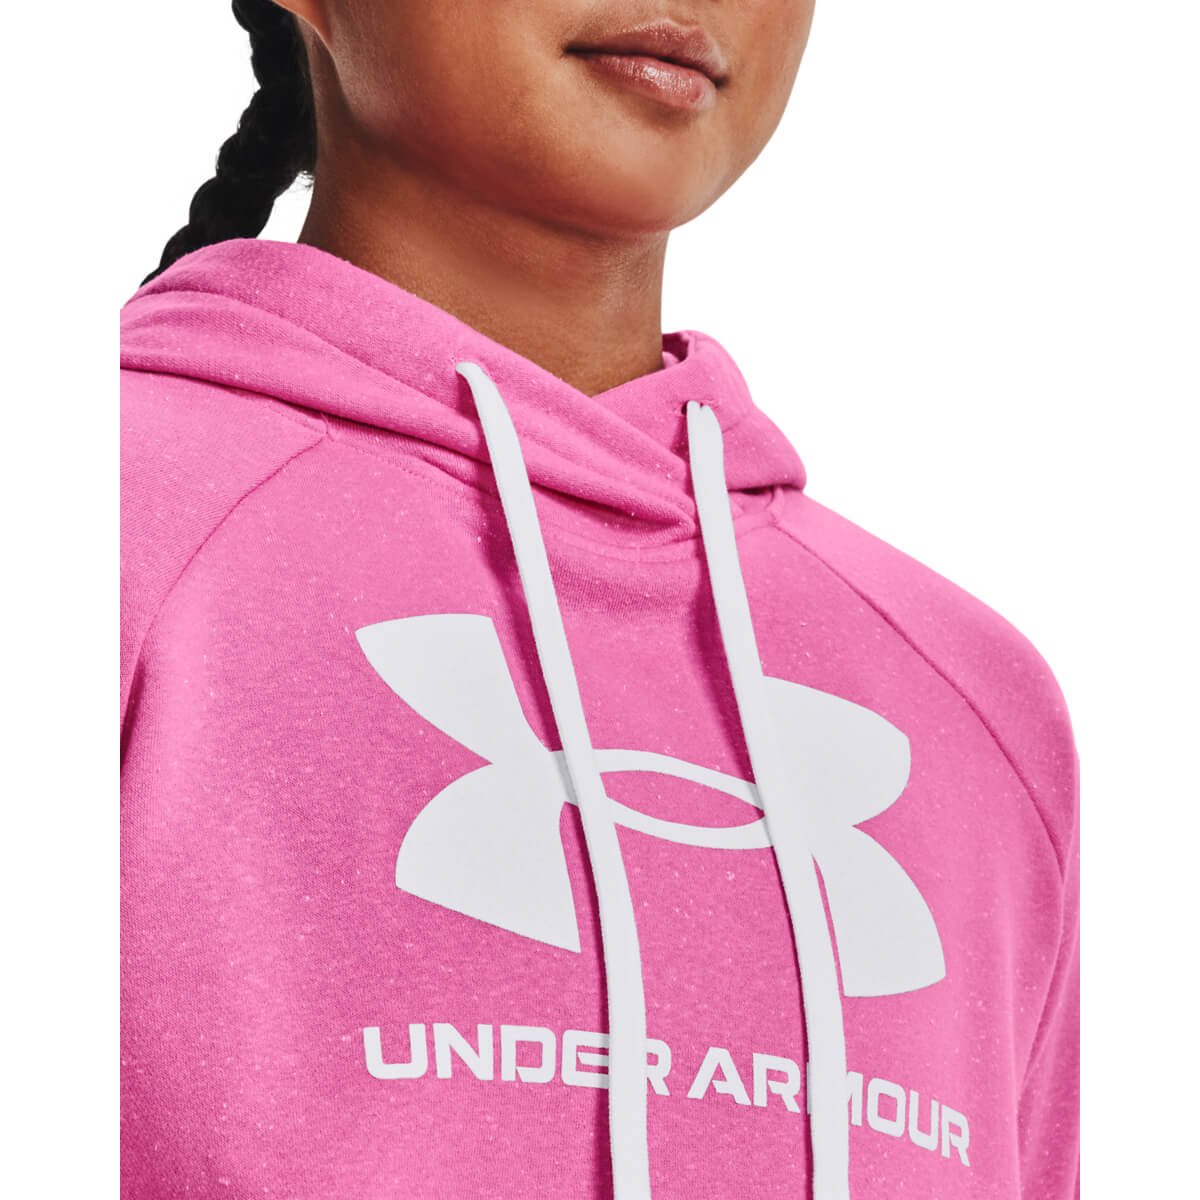 Sudadera Under Armour Mujer Charged Training Rosa 1351790662